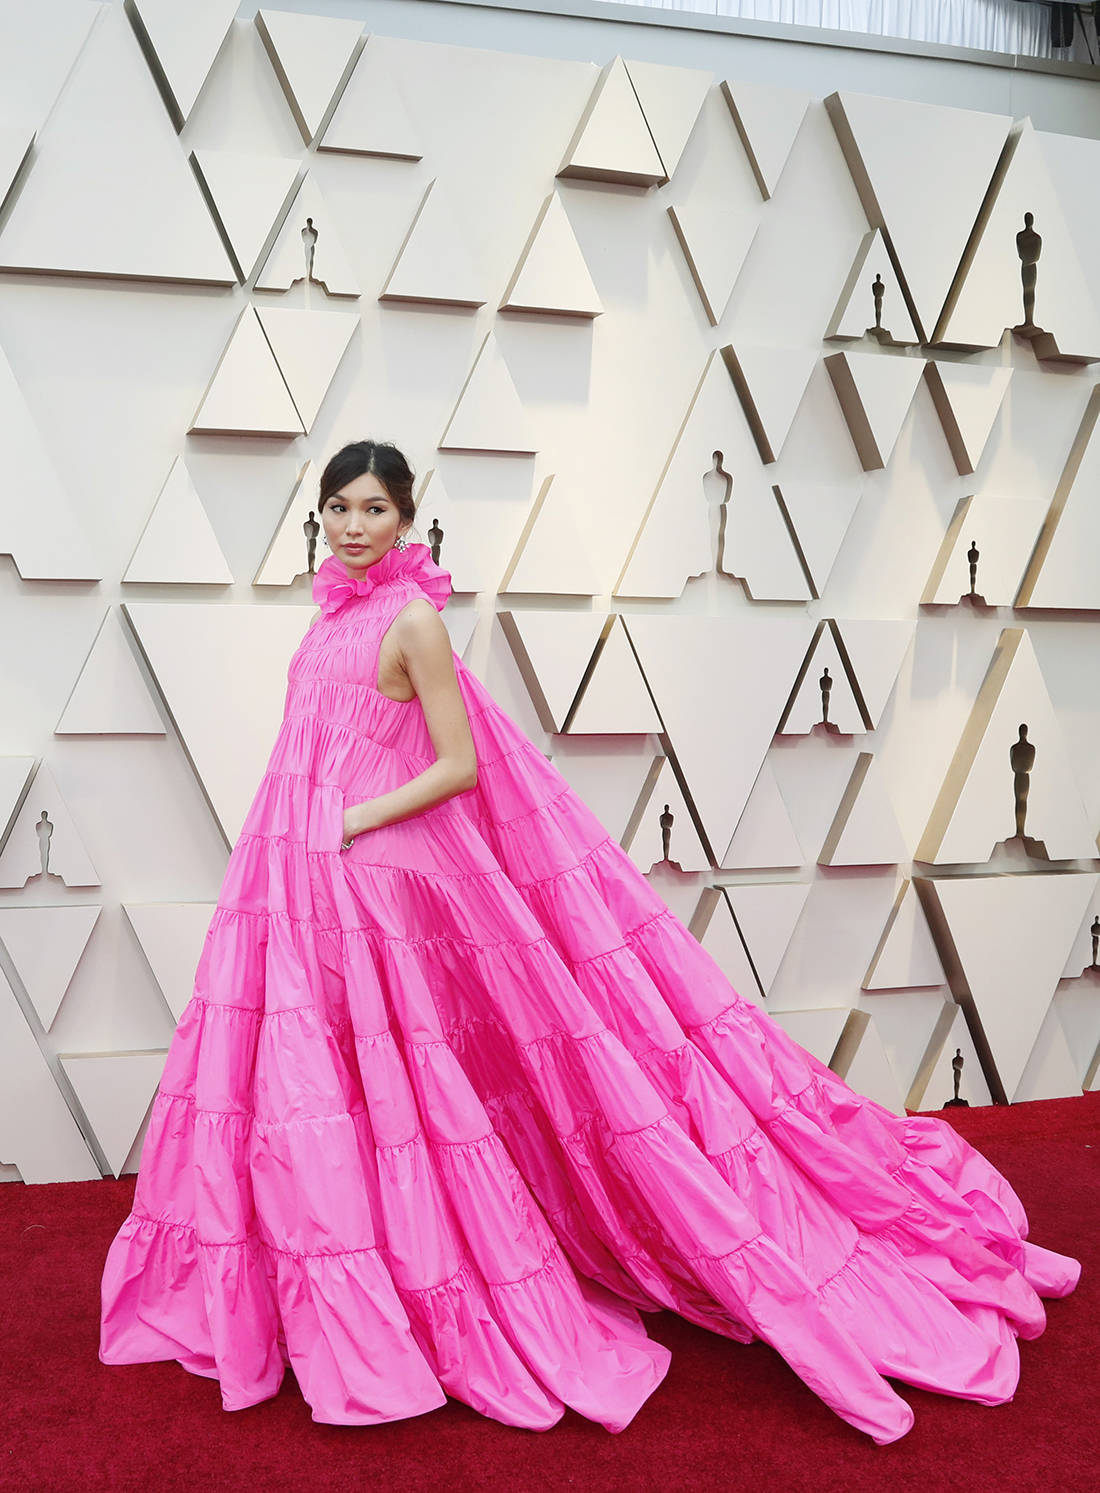 Oscars 2019: Red Carpet pictures from the 91st Academy Awards